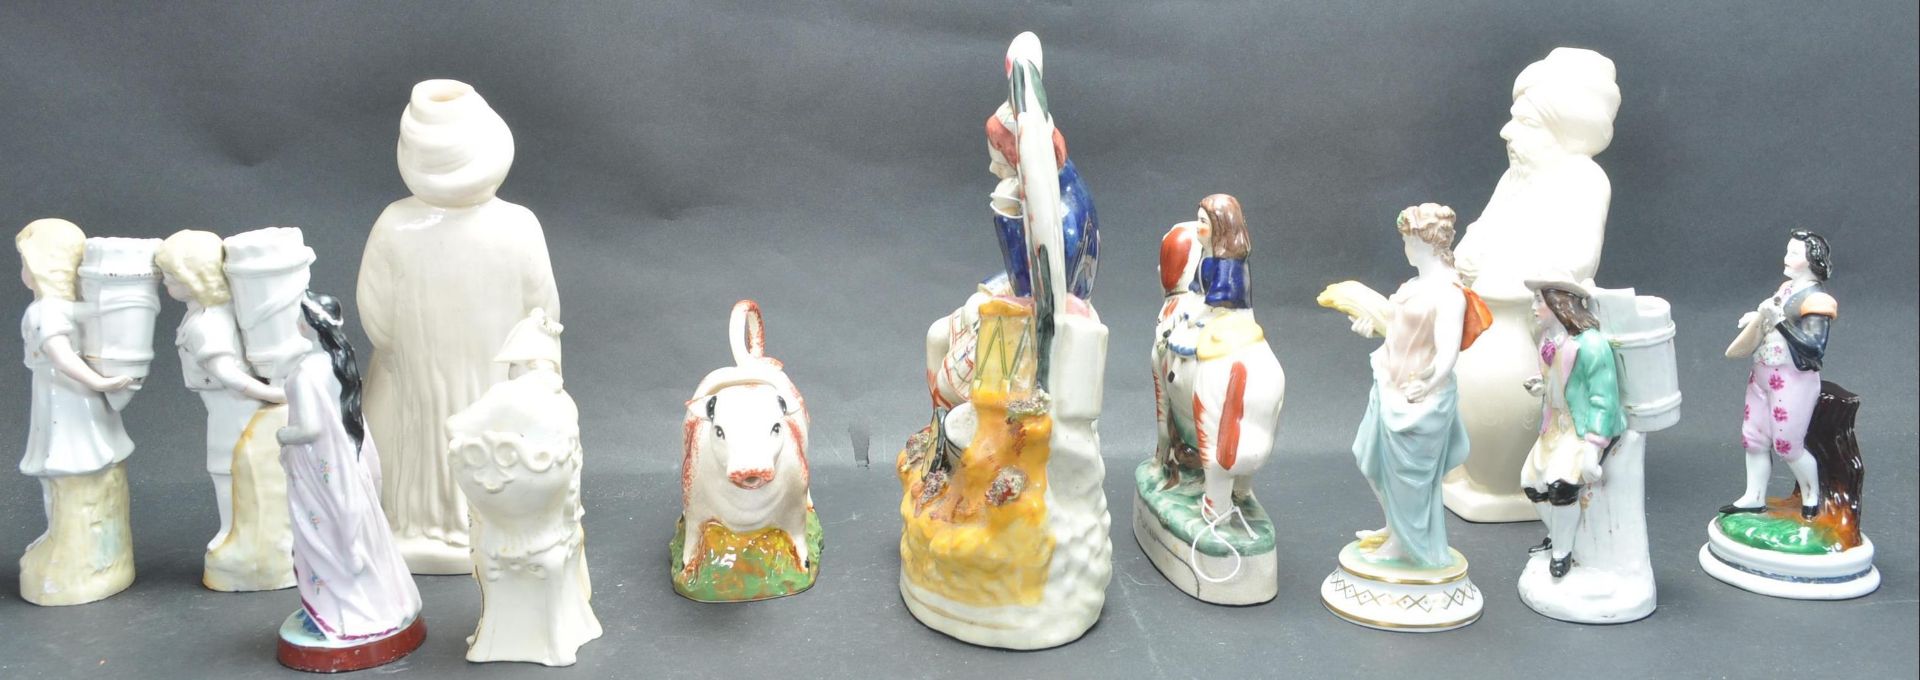 LARGE COLLECTION OF 20TH CENTURY CERAMICS - Image 4 of 6